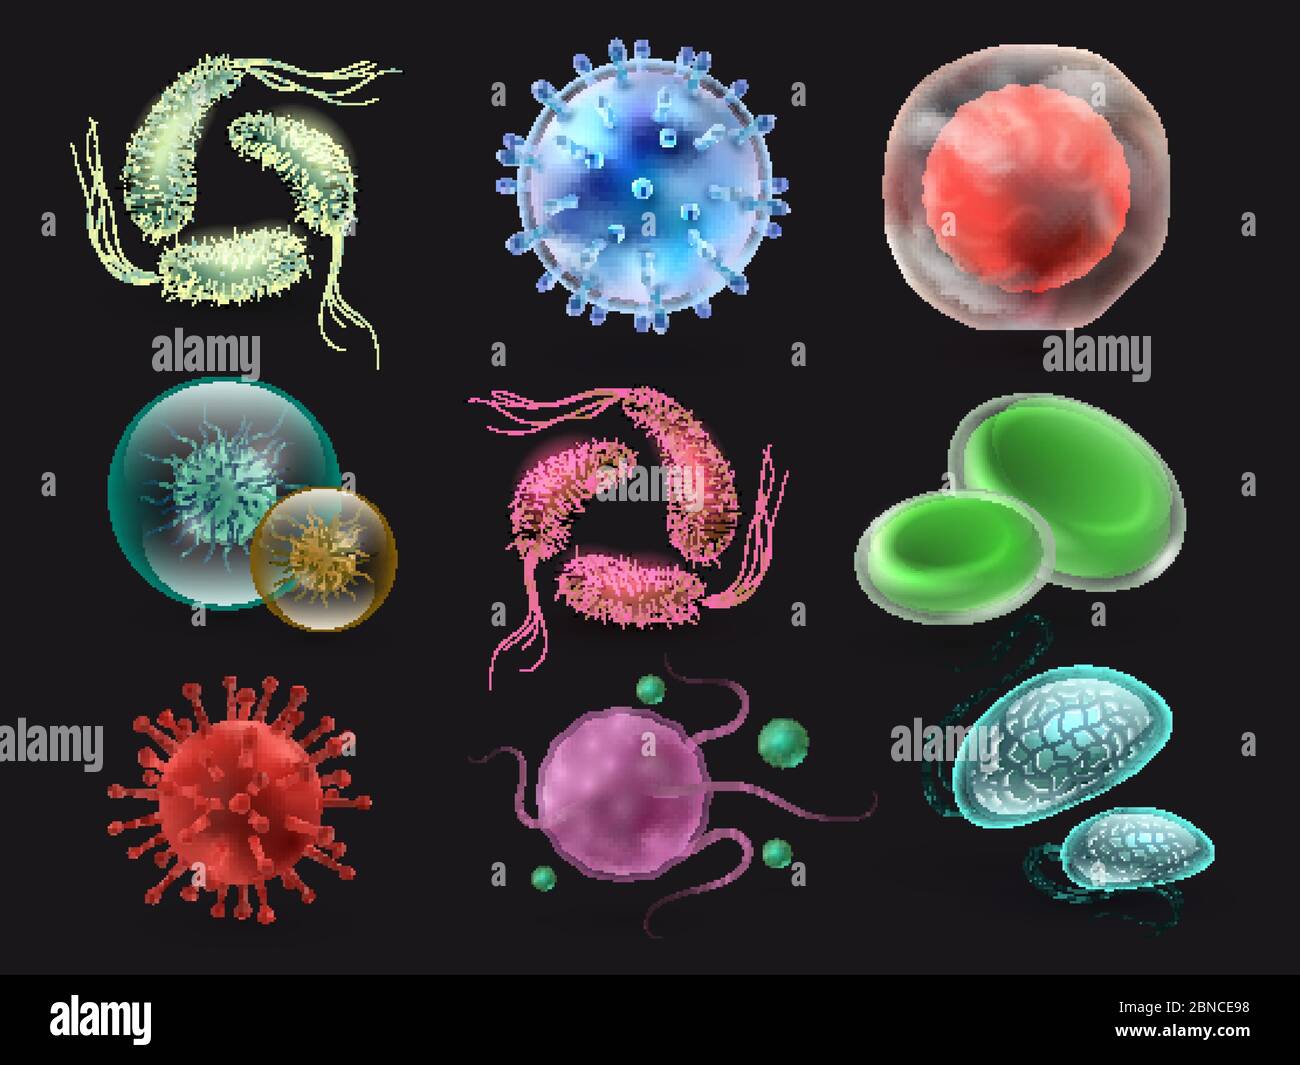 Bacteries and viruses vector set, microbiology elements isolated on black background. Collection of bacterial organism, disease microbe illustration Stock Vector